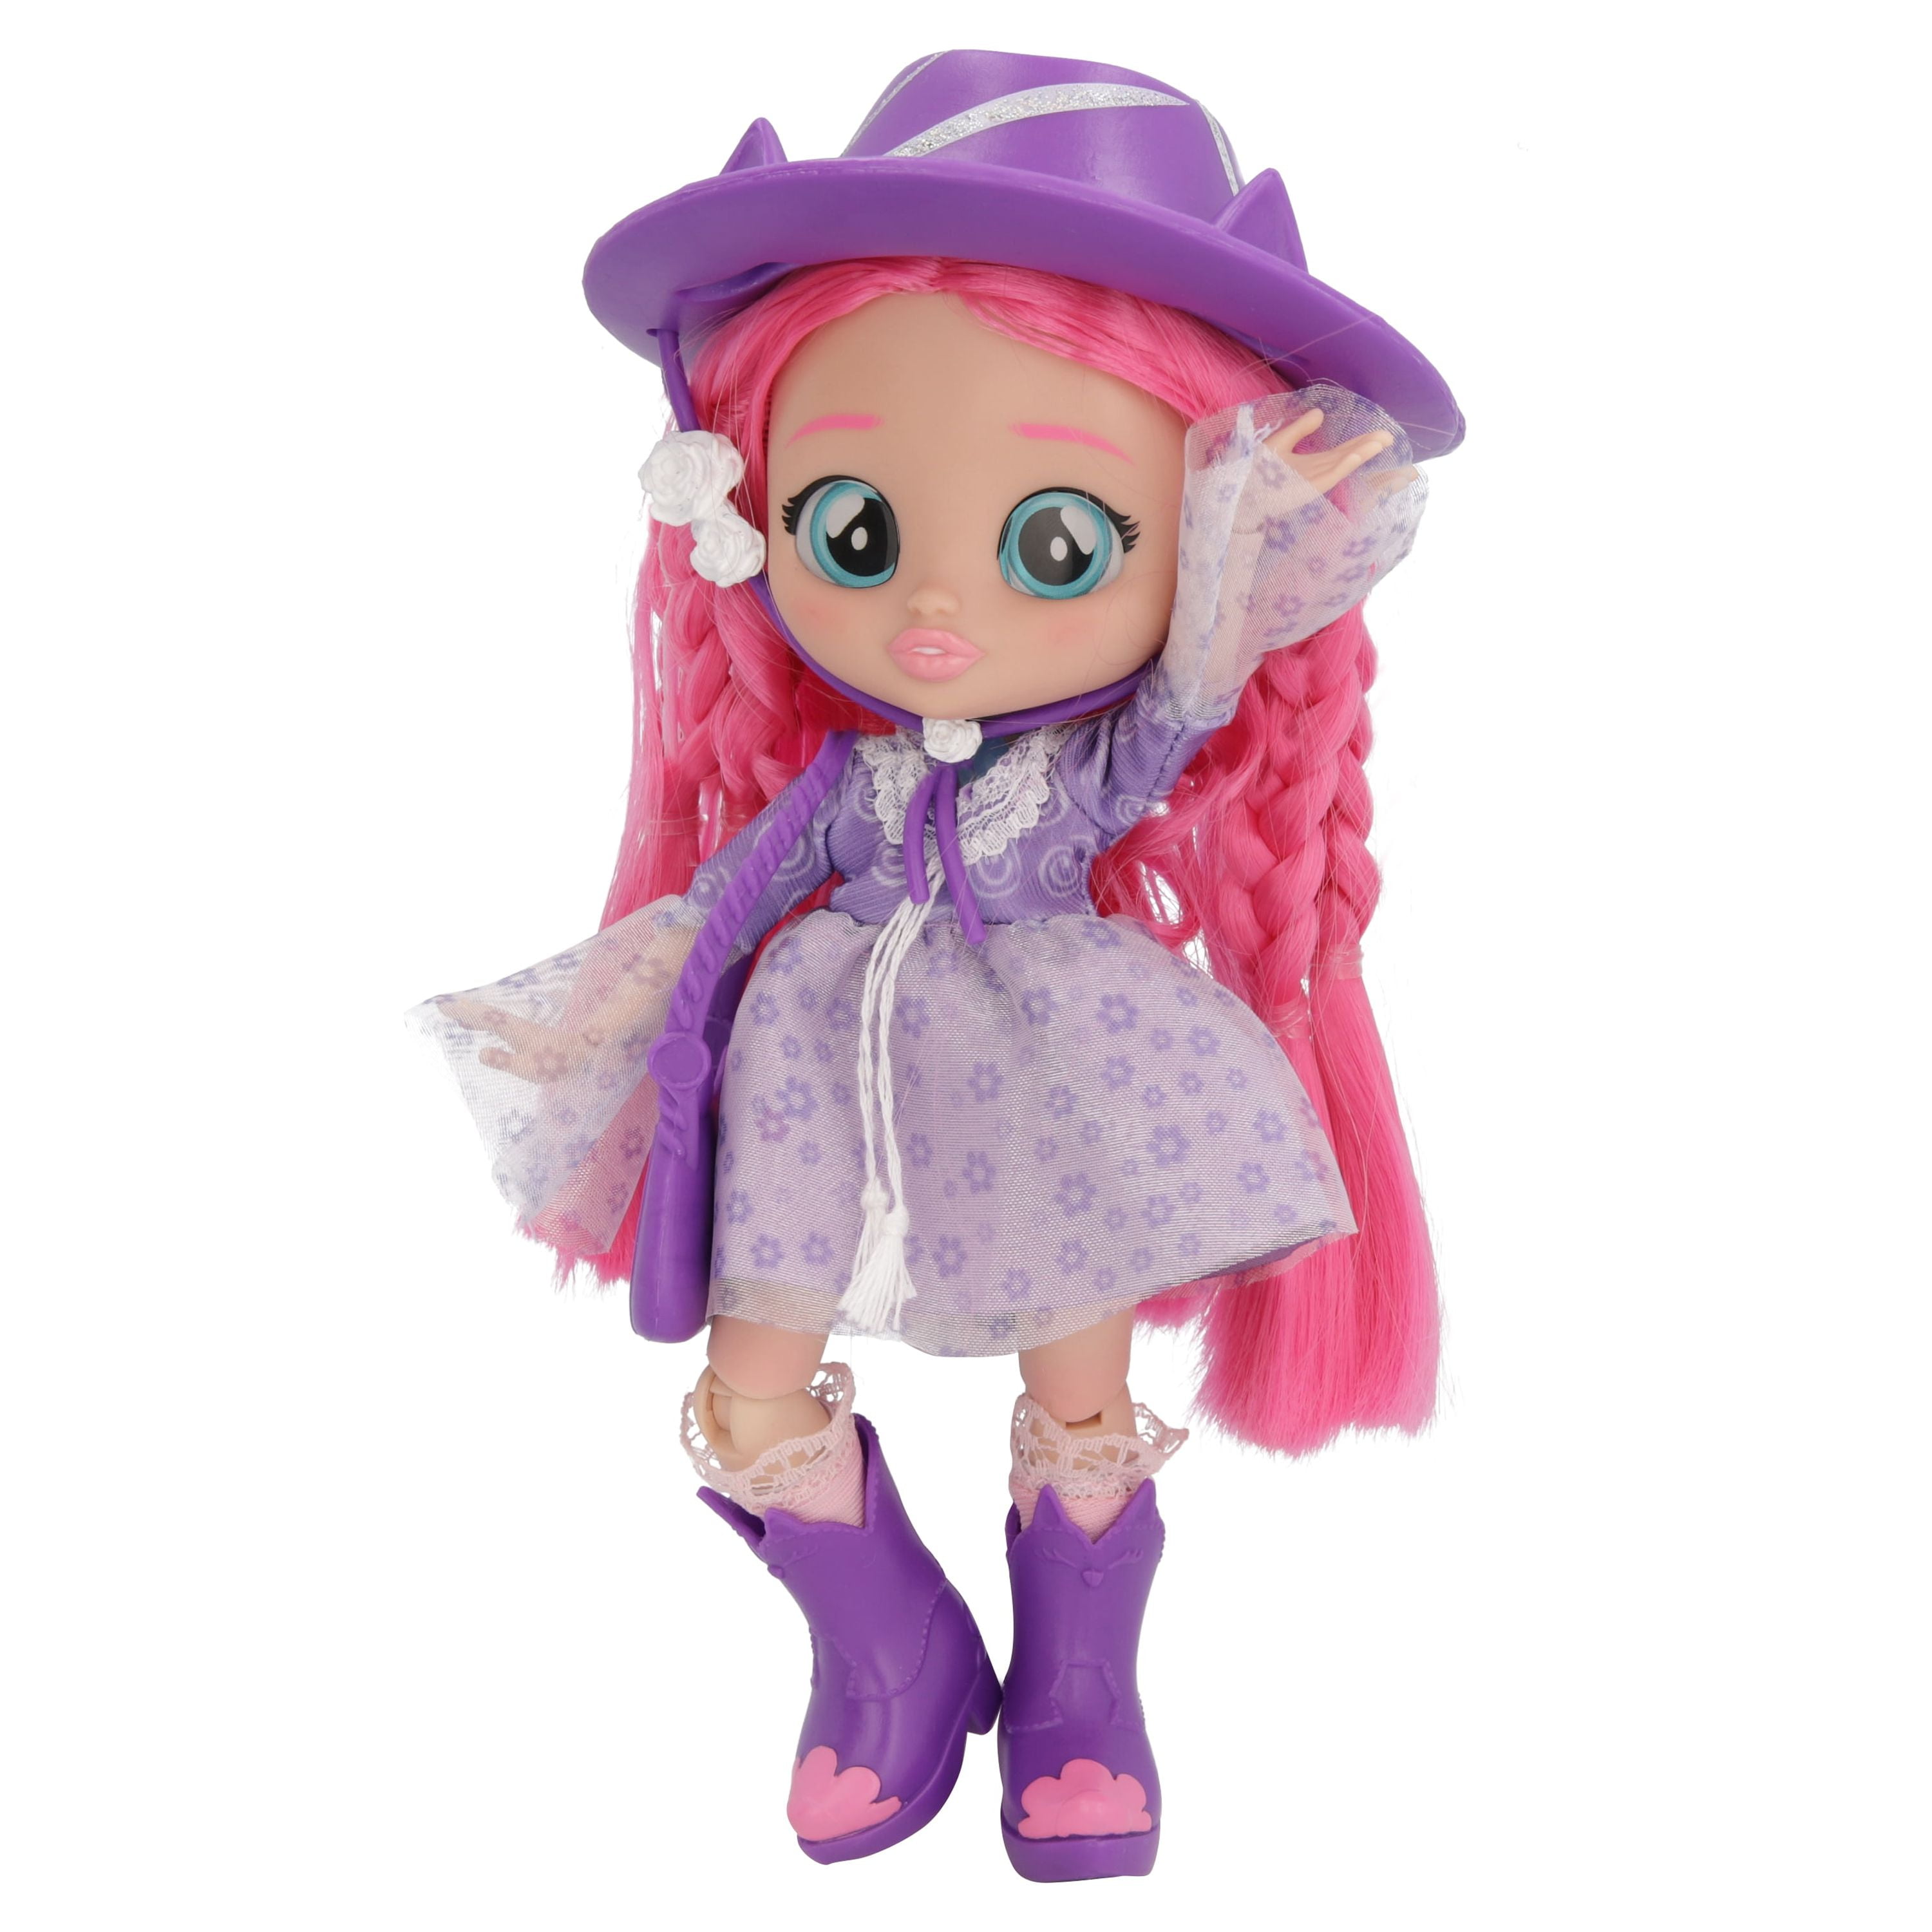 BFF by Cry Babies Katie 8 inch Fashion Doll for Girls Ages 4-7 Years